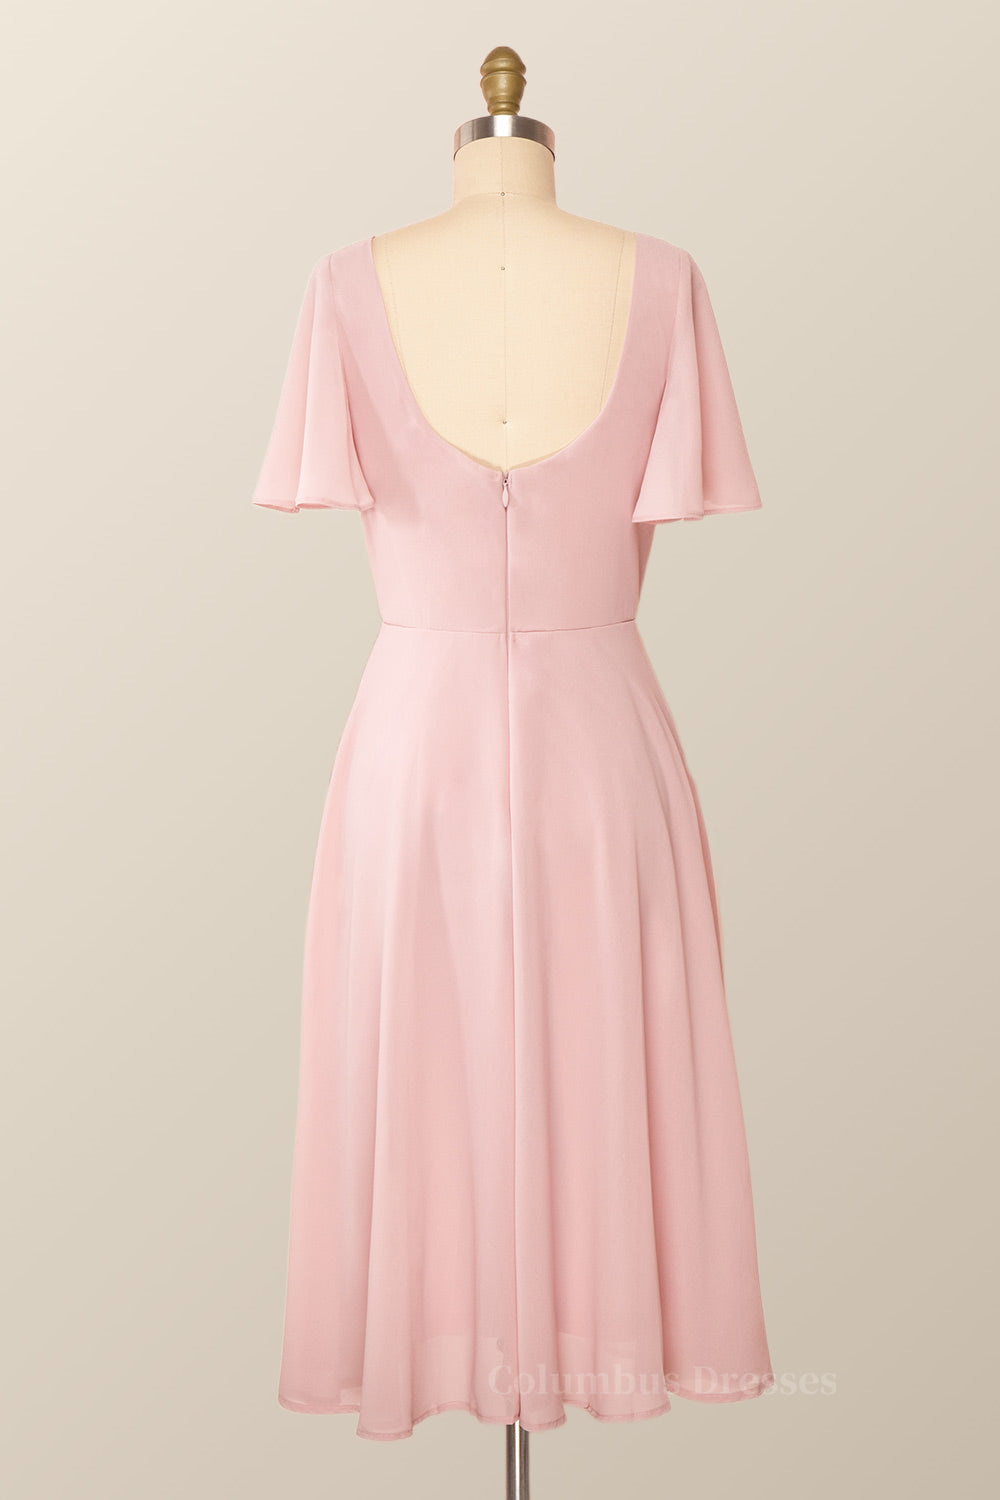 Party Dresses Cheap, Flare Sleeves Pink Chiffon Short Party Dress